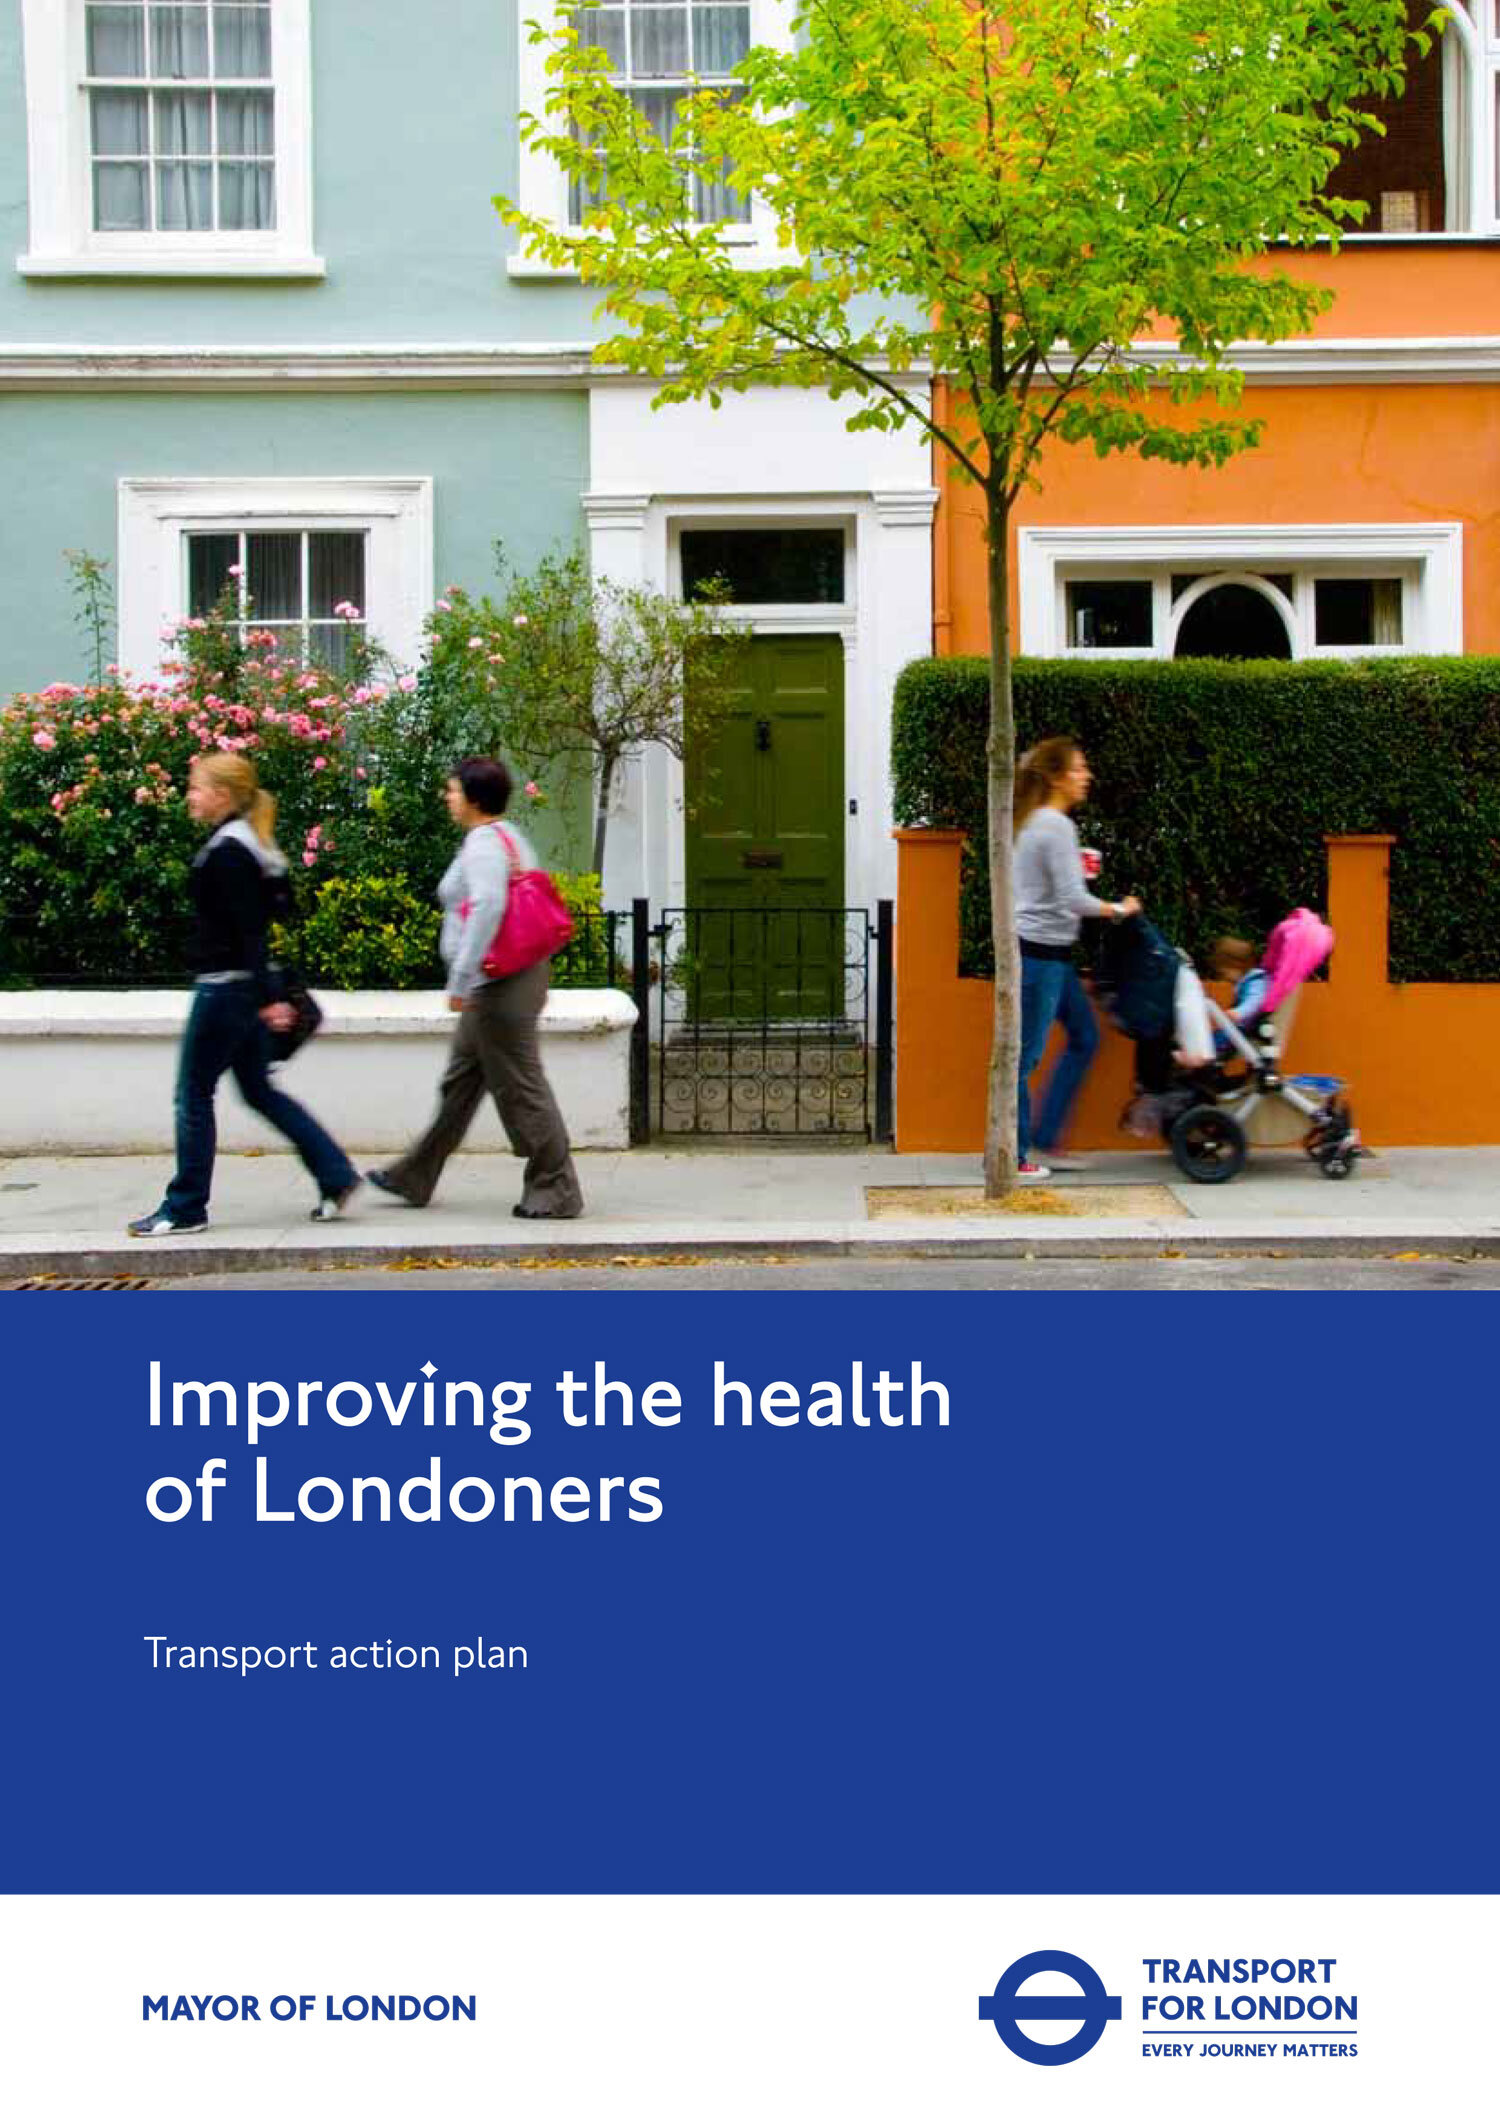 improving-the-health-of-londoners-transport-action-plan-1.jpg